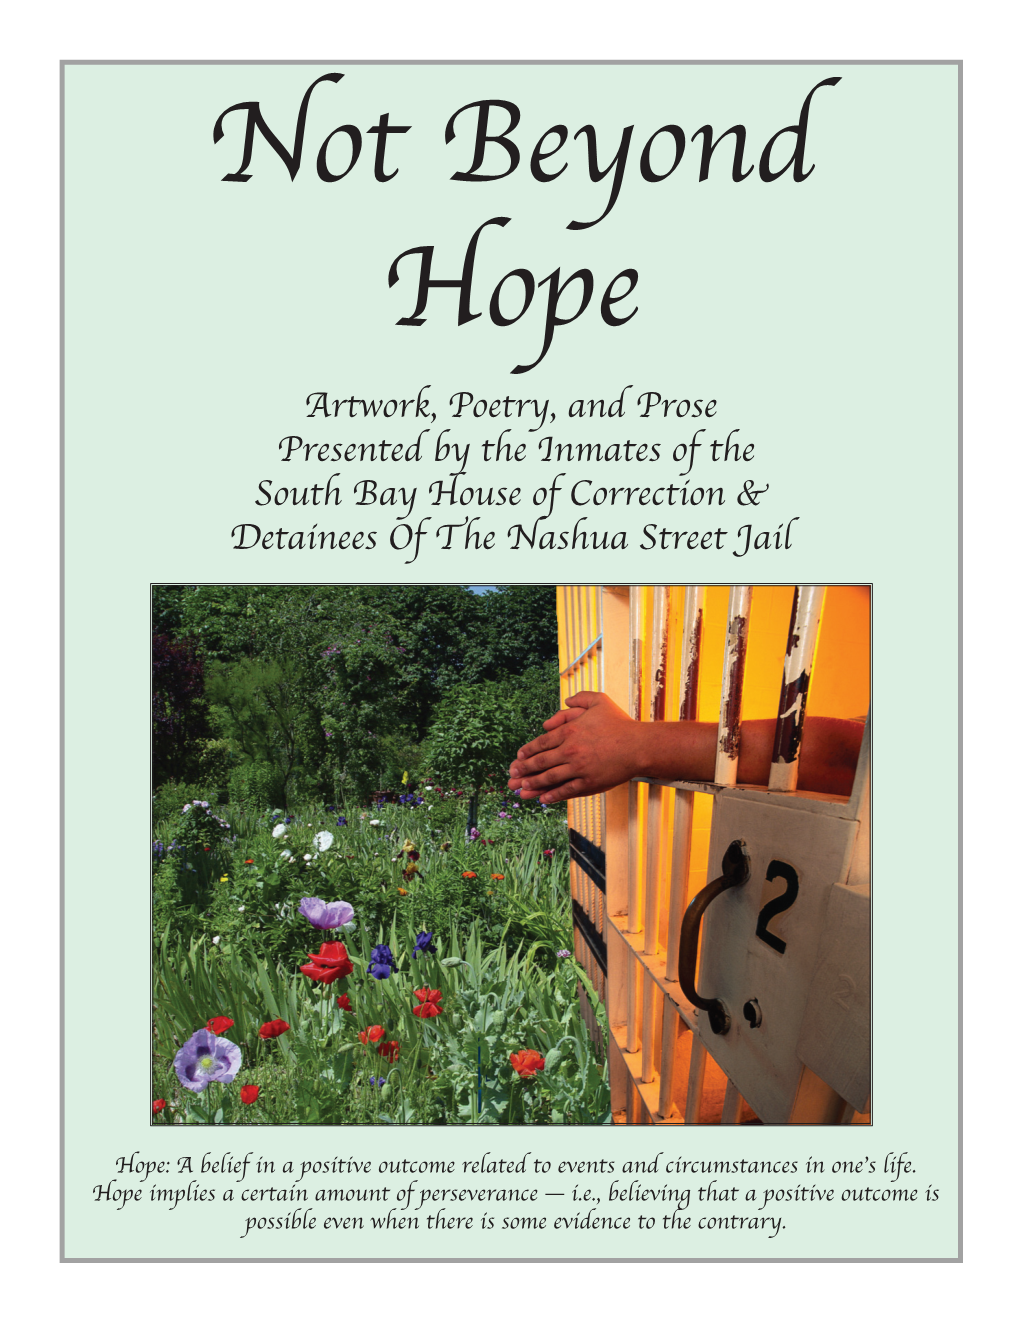 Artwork, Poetry, and Prose Presented by the Inmates of the South Bay House of Correction & Detainees of the Nashua Street Jail